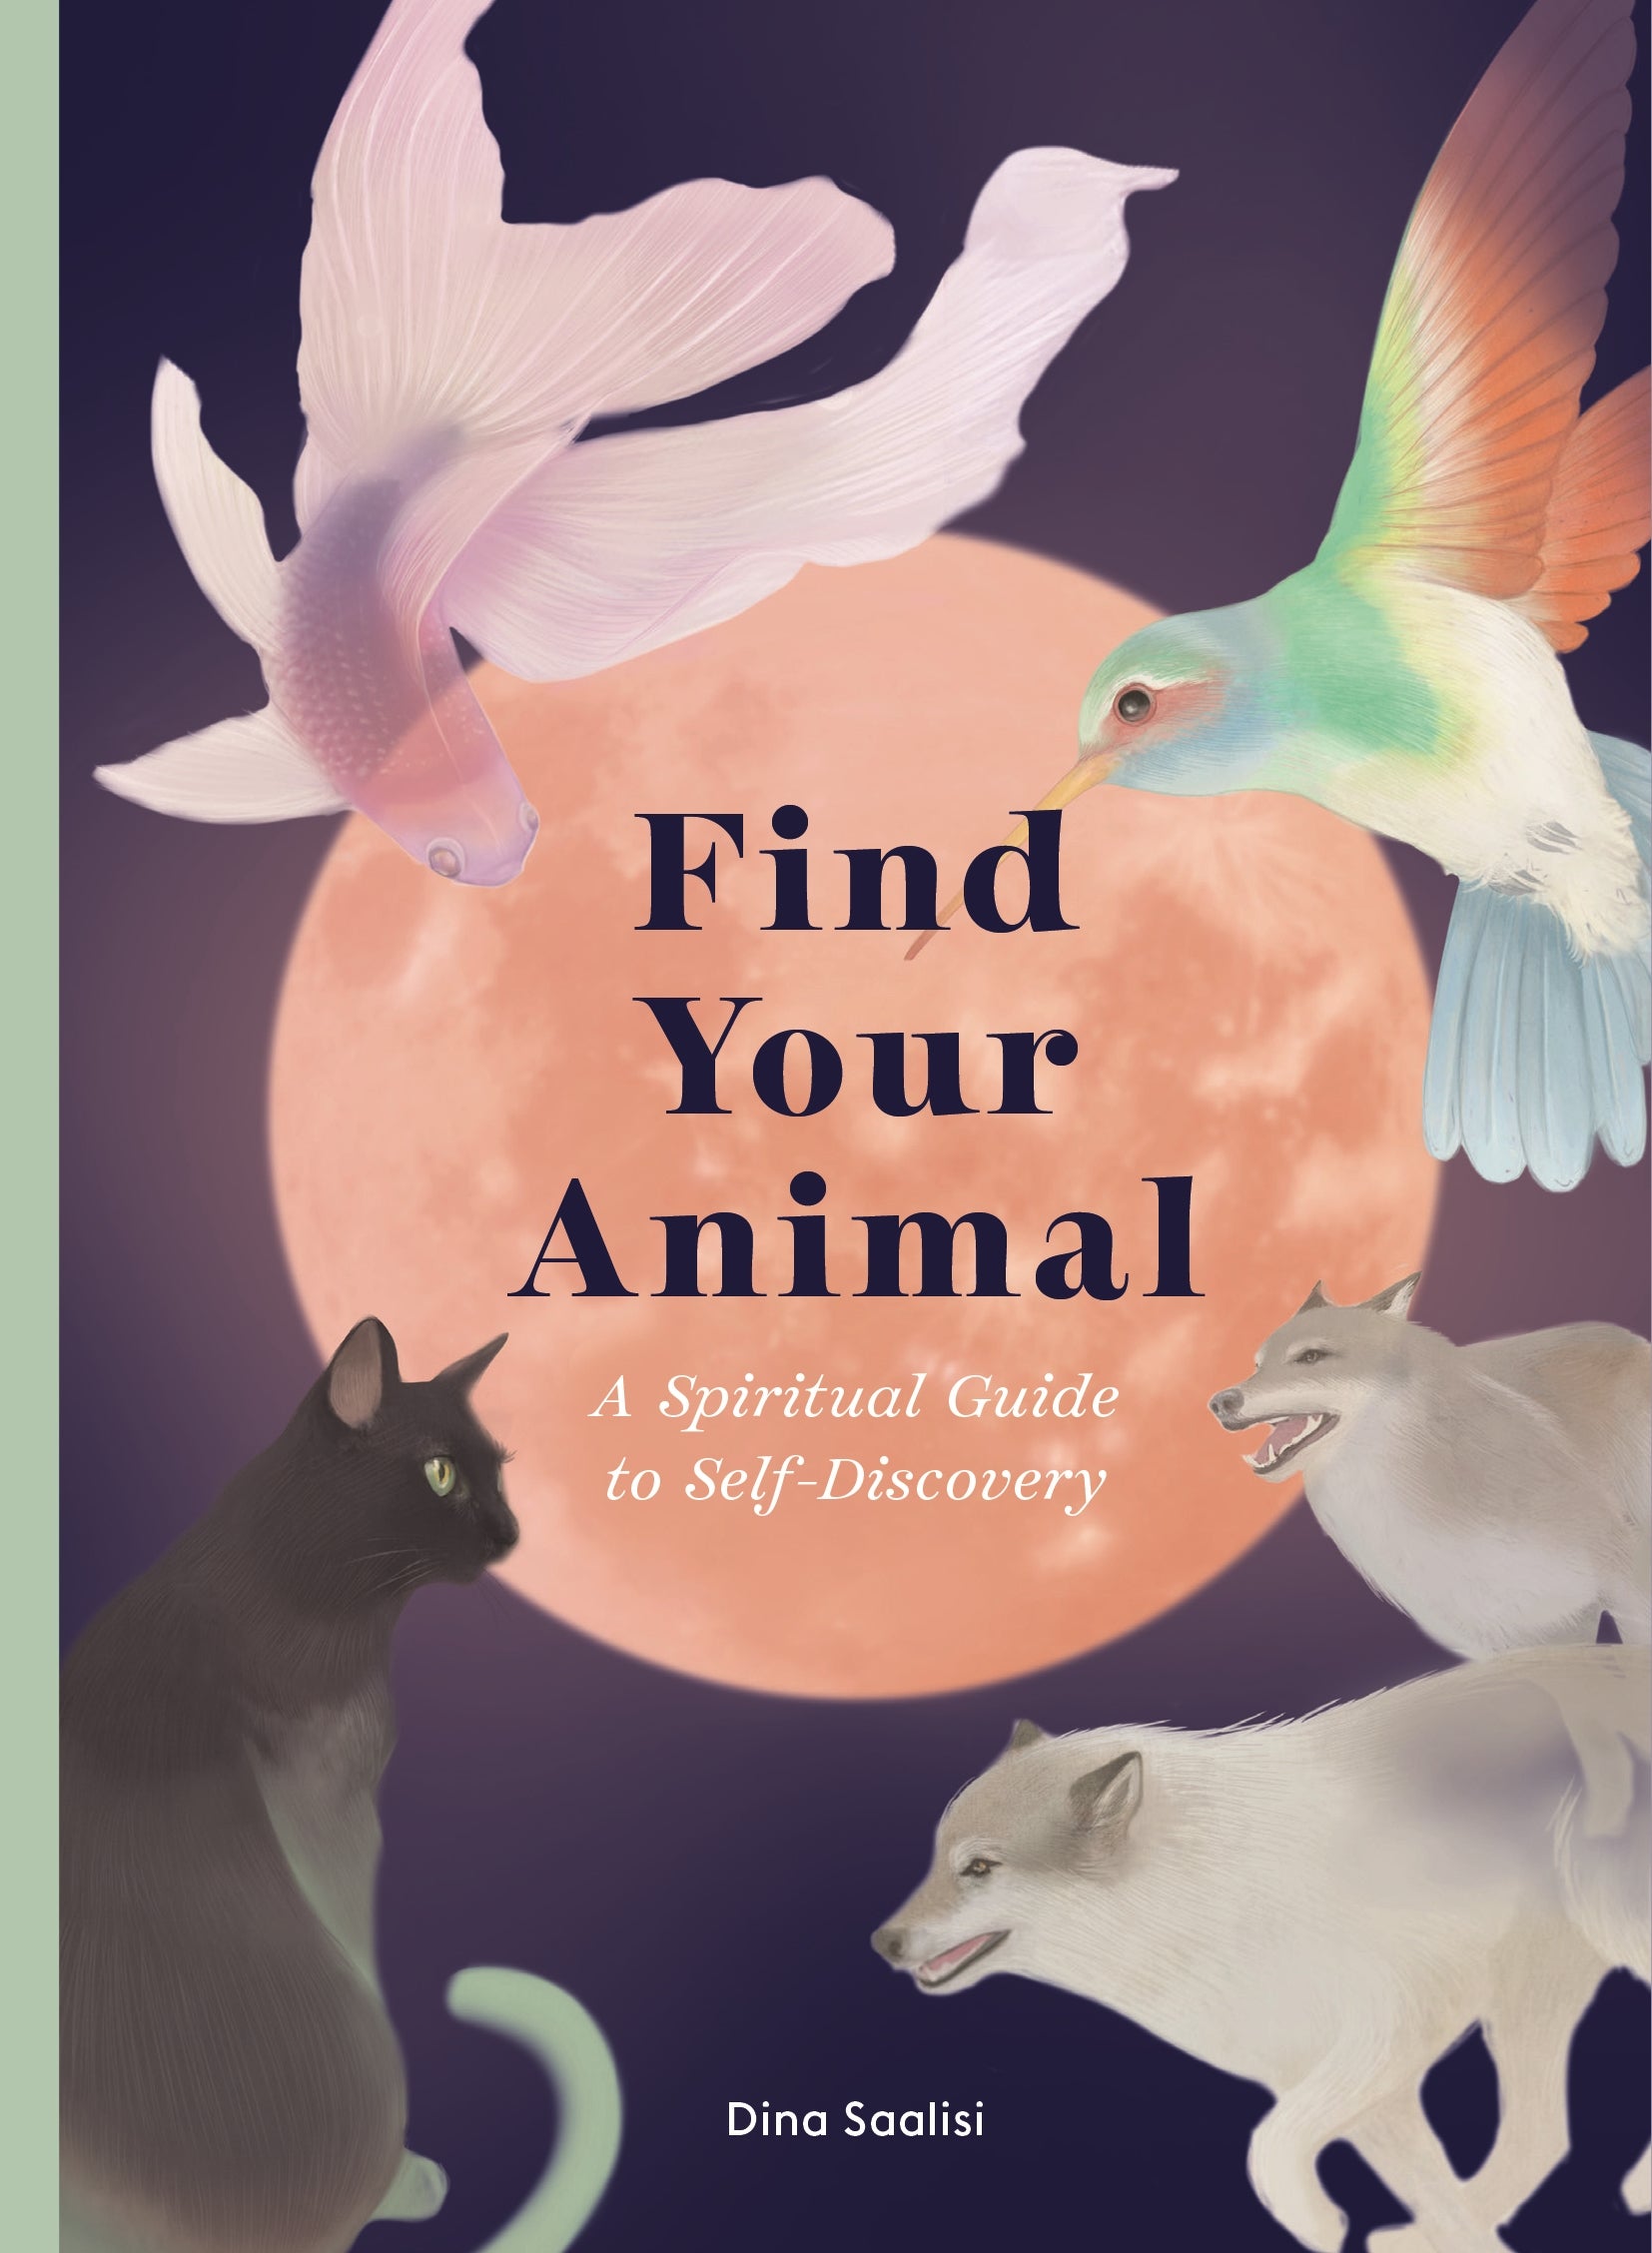 Find Your Animal by Dina Saalisi